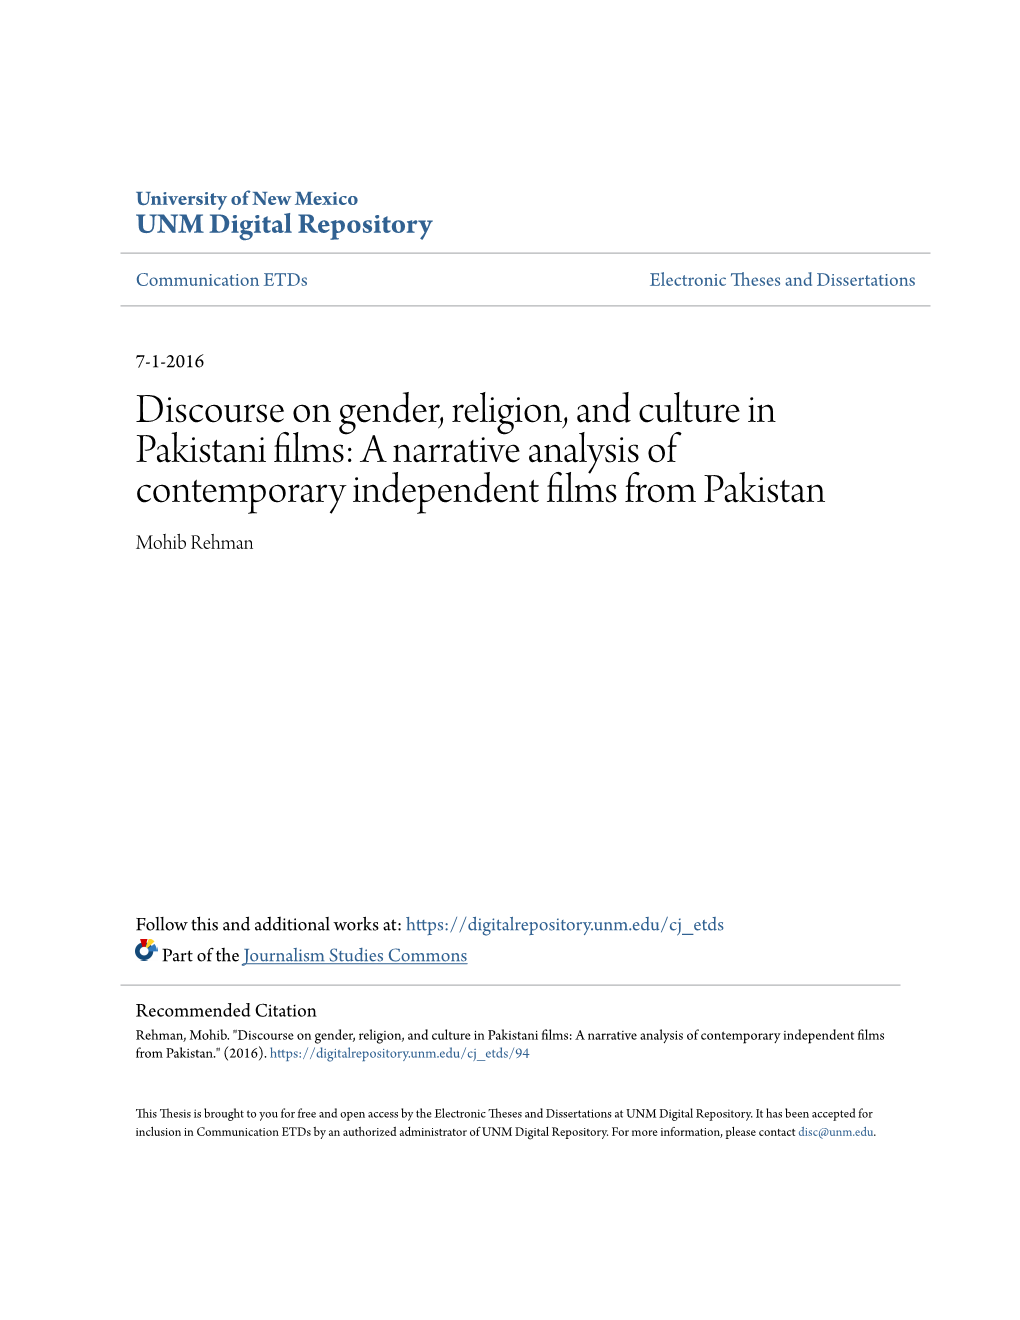 Discourse on Gender, Religion, and Culture in Pakistani Films: a Narrative Analysis of Contemporary Independent Films from Pakistan Mohib Rehman